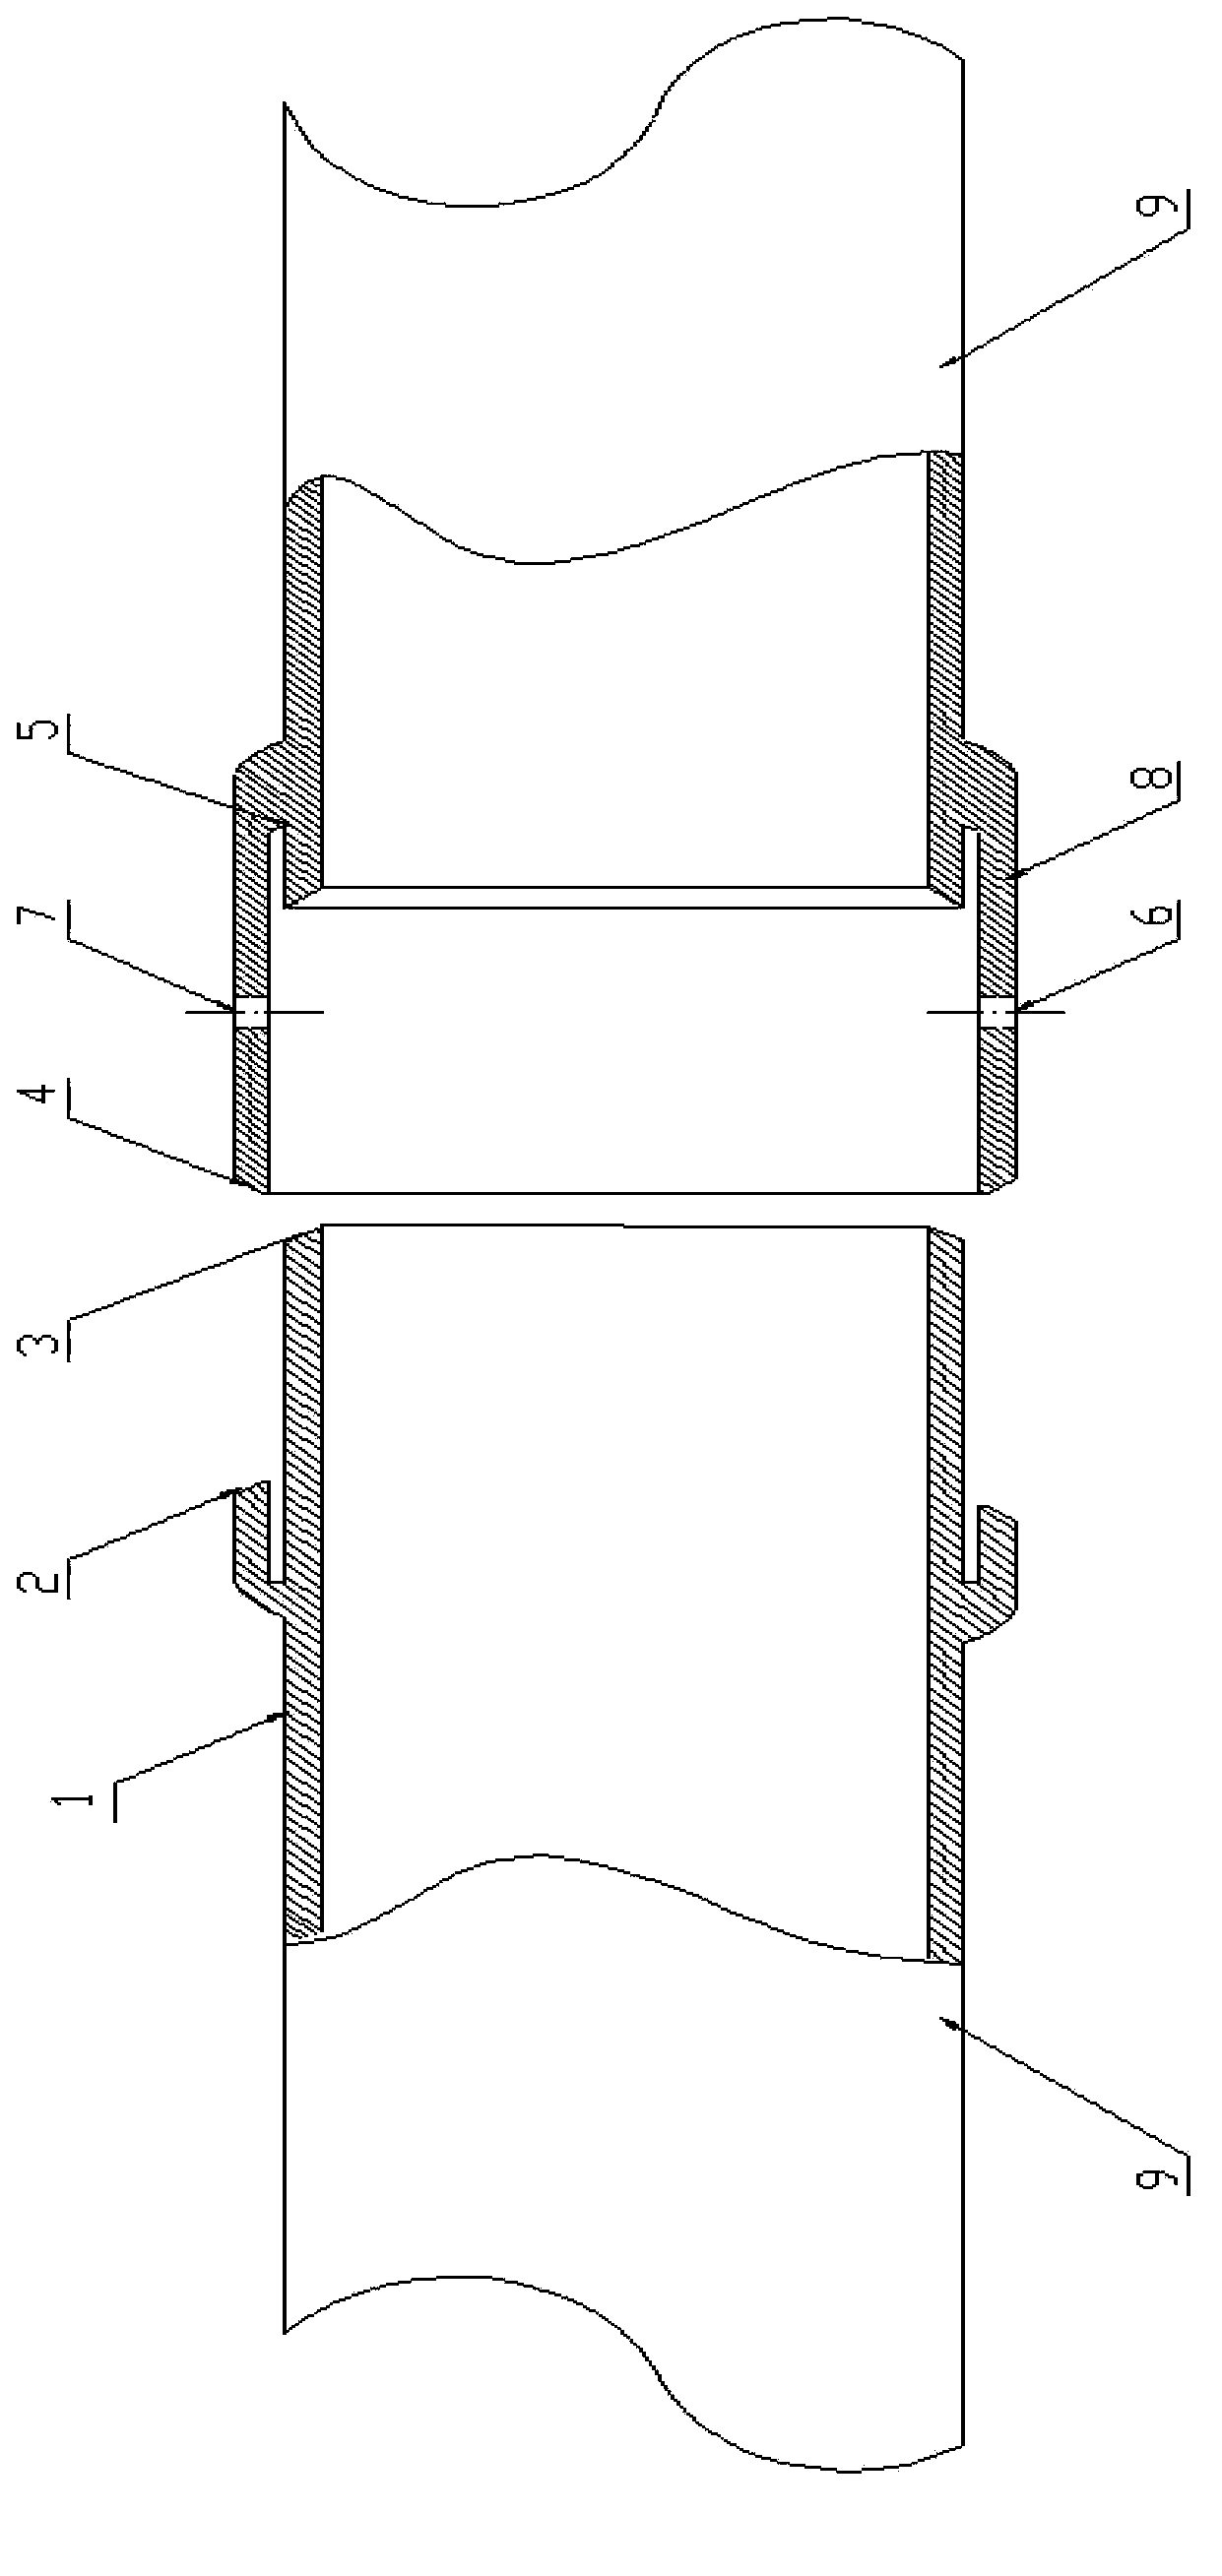 Lossless welding connector for long-distance pipeline steel pipe with internal coating